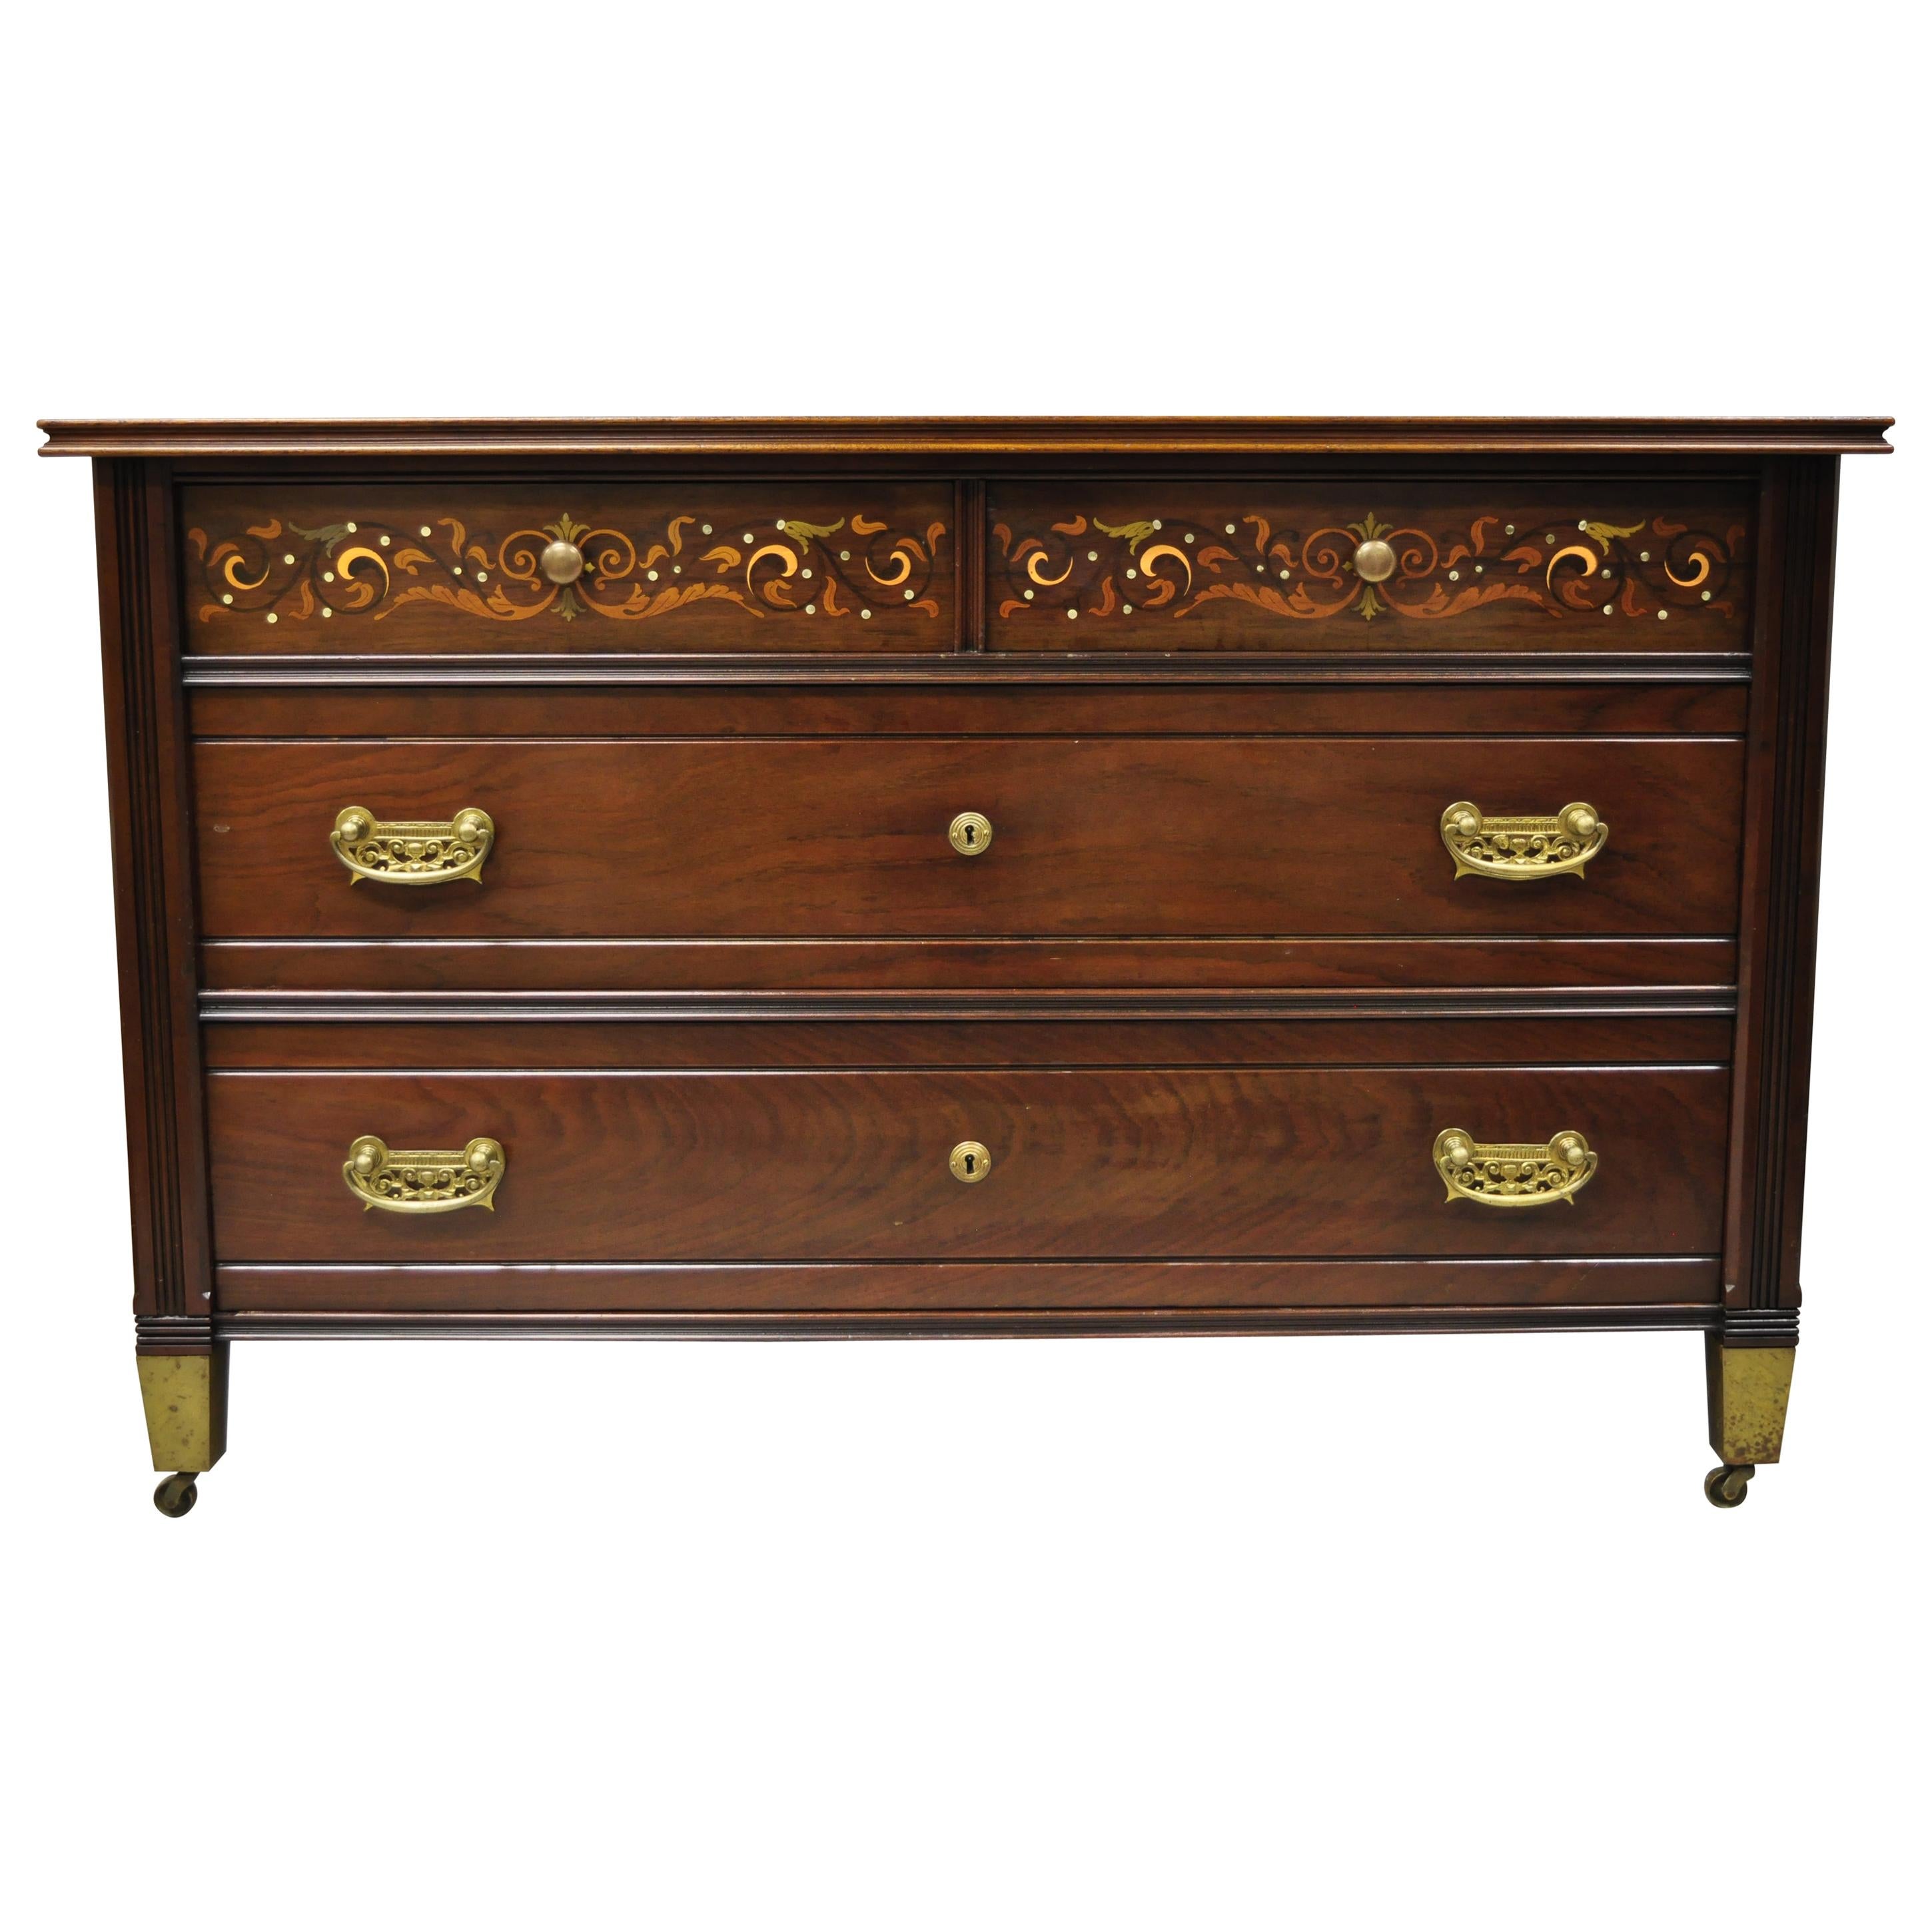 Antique Herts Brothers Edwardian Bronze & Satinwood Inlay Mahogany Chest Dresser For Sale